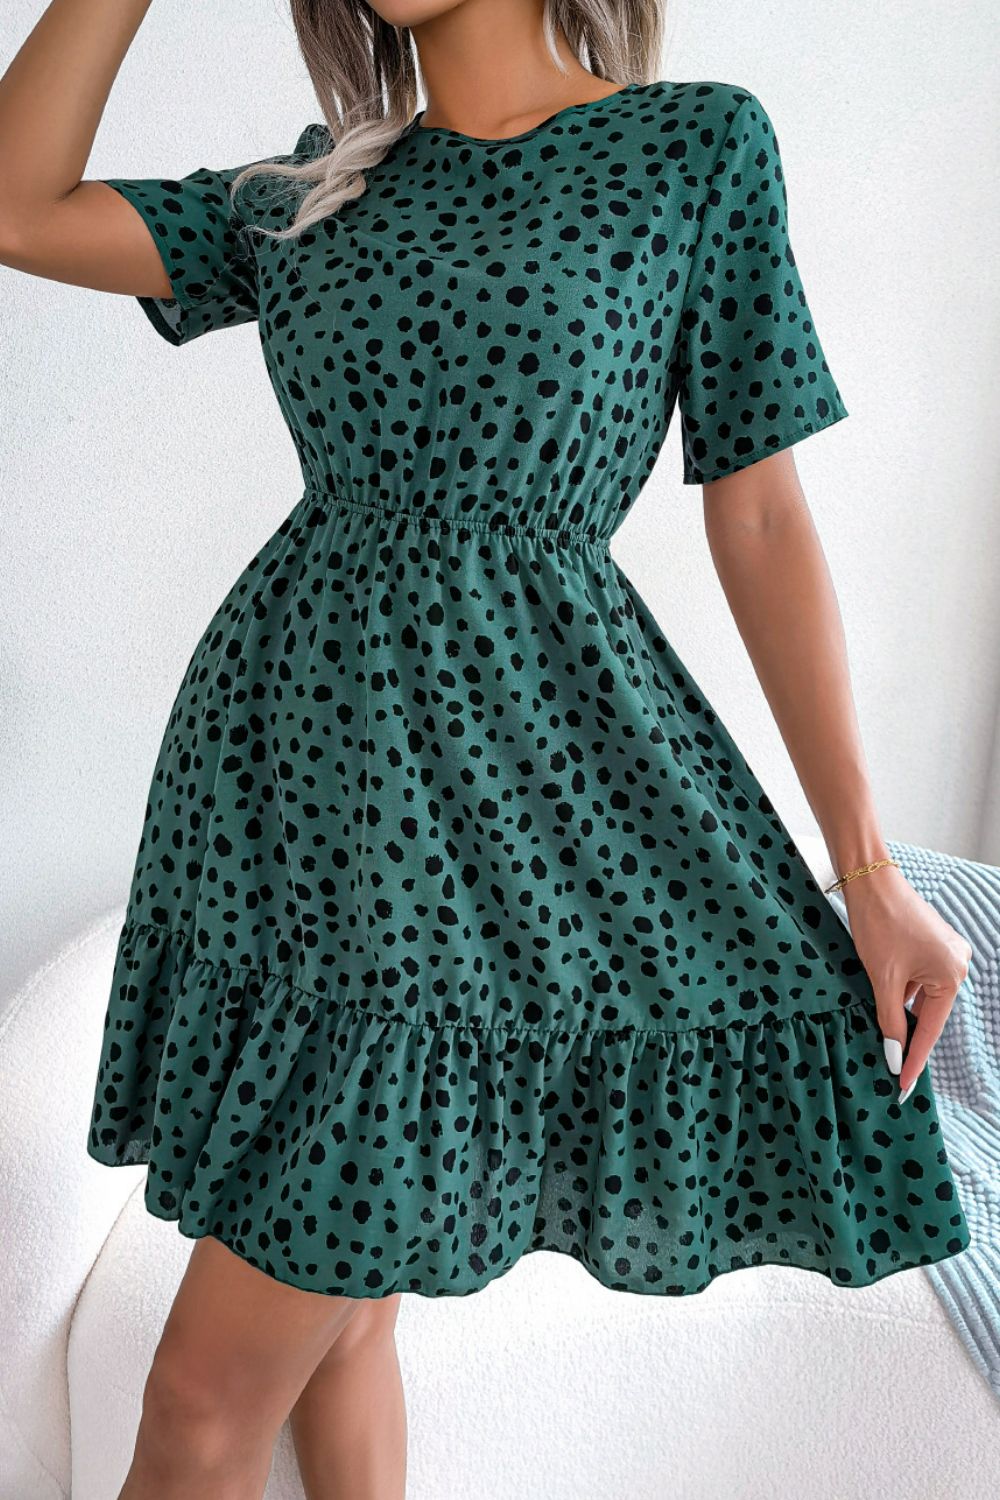 Printed Round Neck Short Sleeve Ruffled Dress The Stout Steer